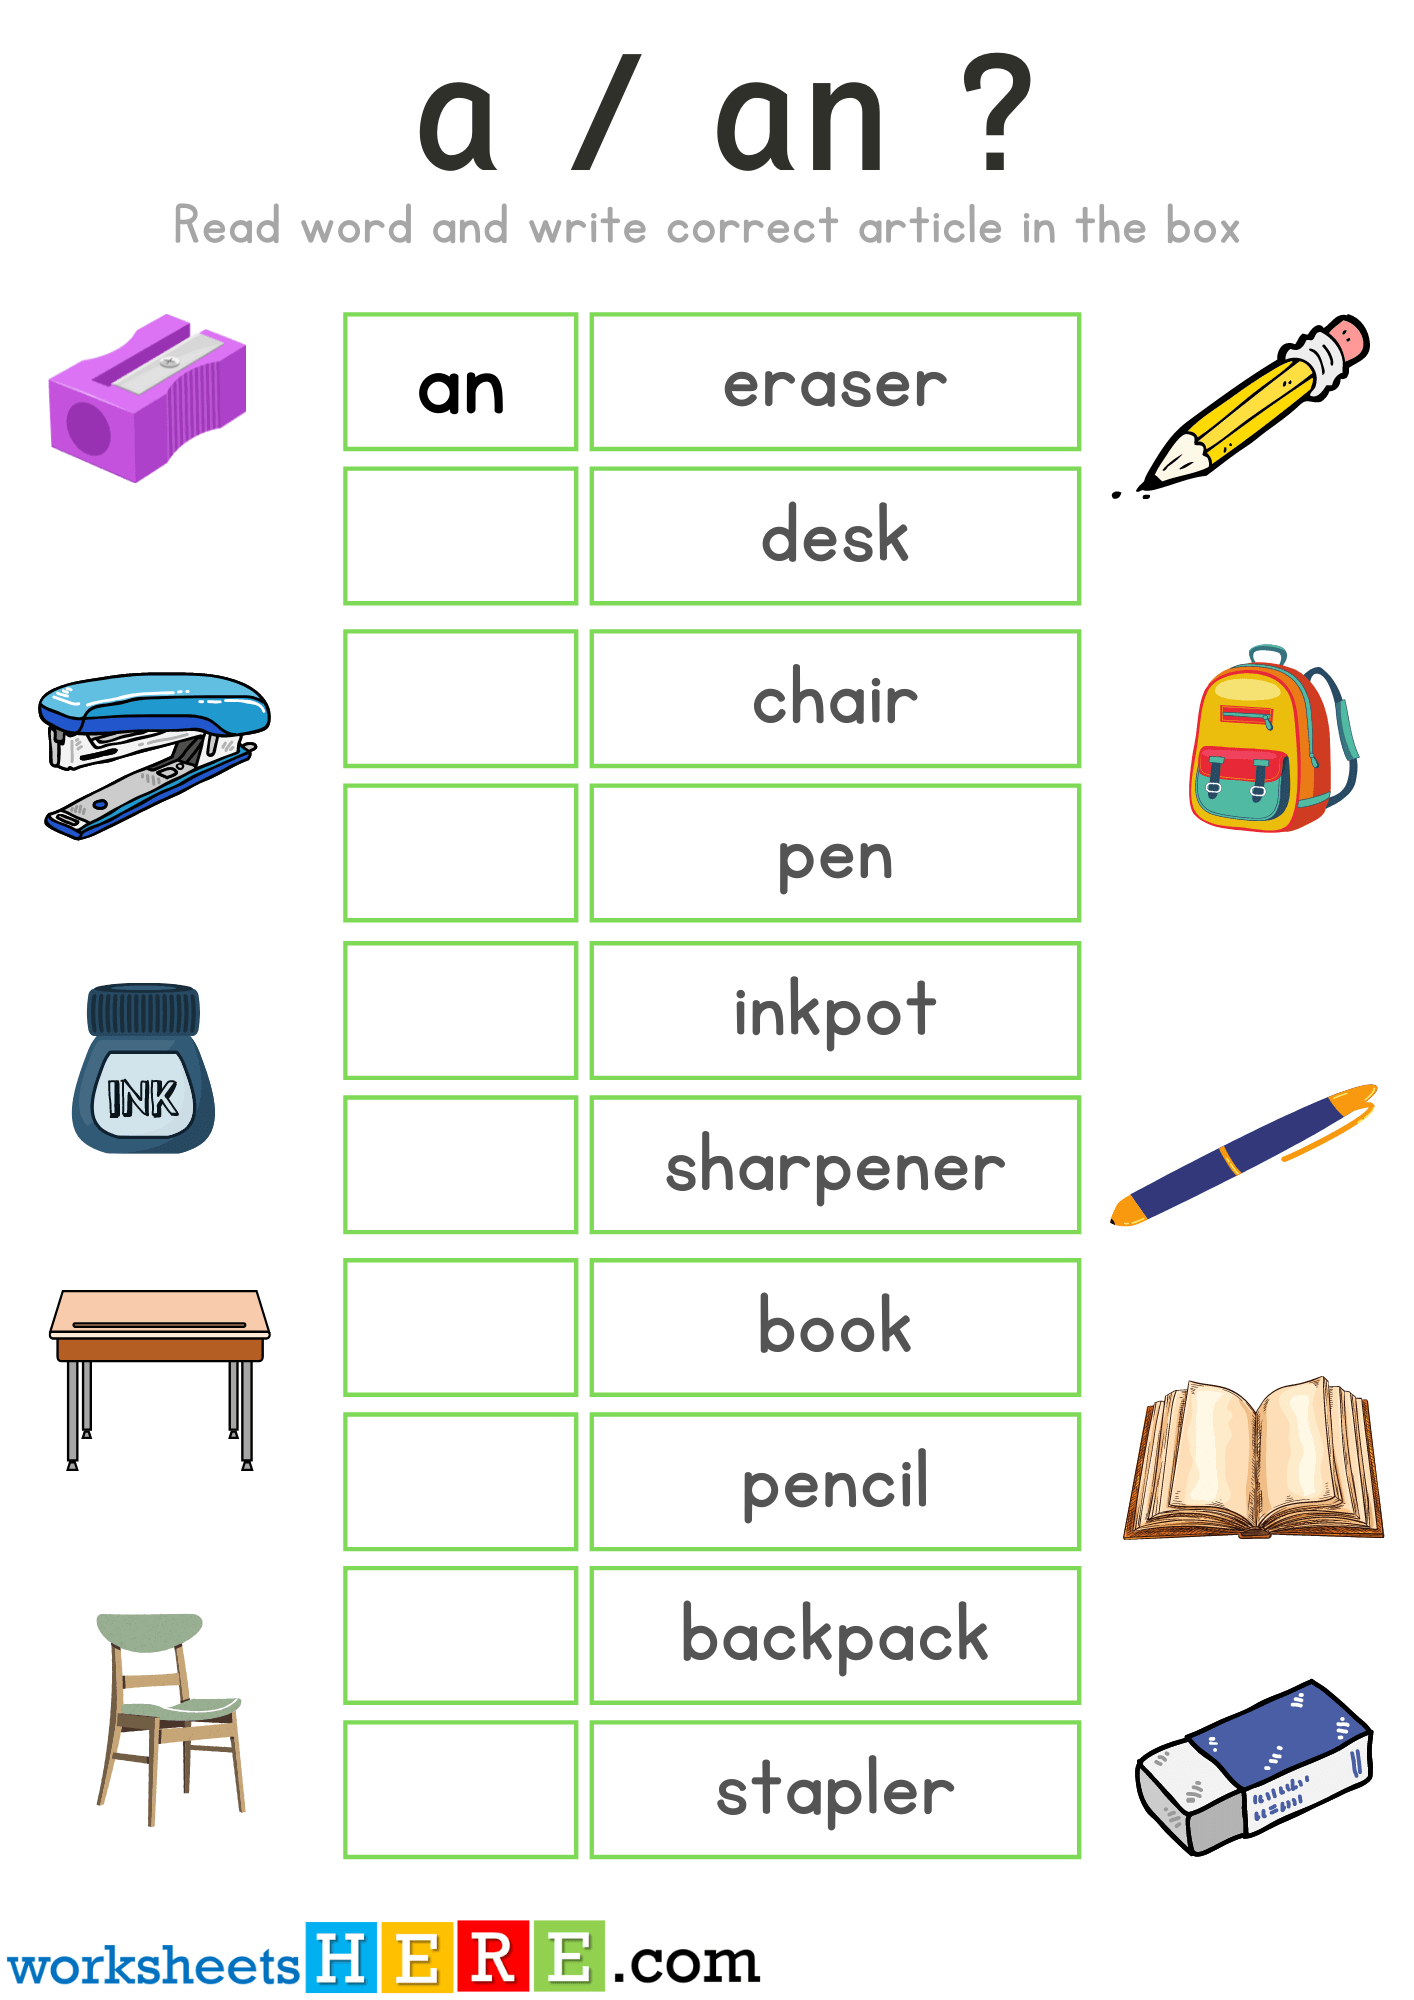 Articles Exercises with School Objects Names and Pictures, A or An PDF Worksheets For Kids